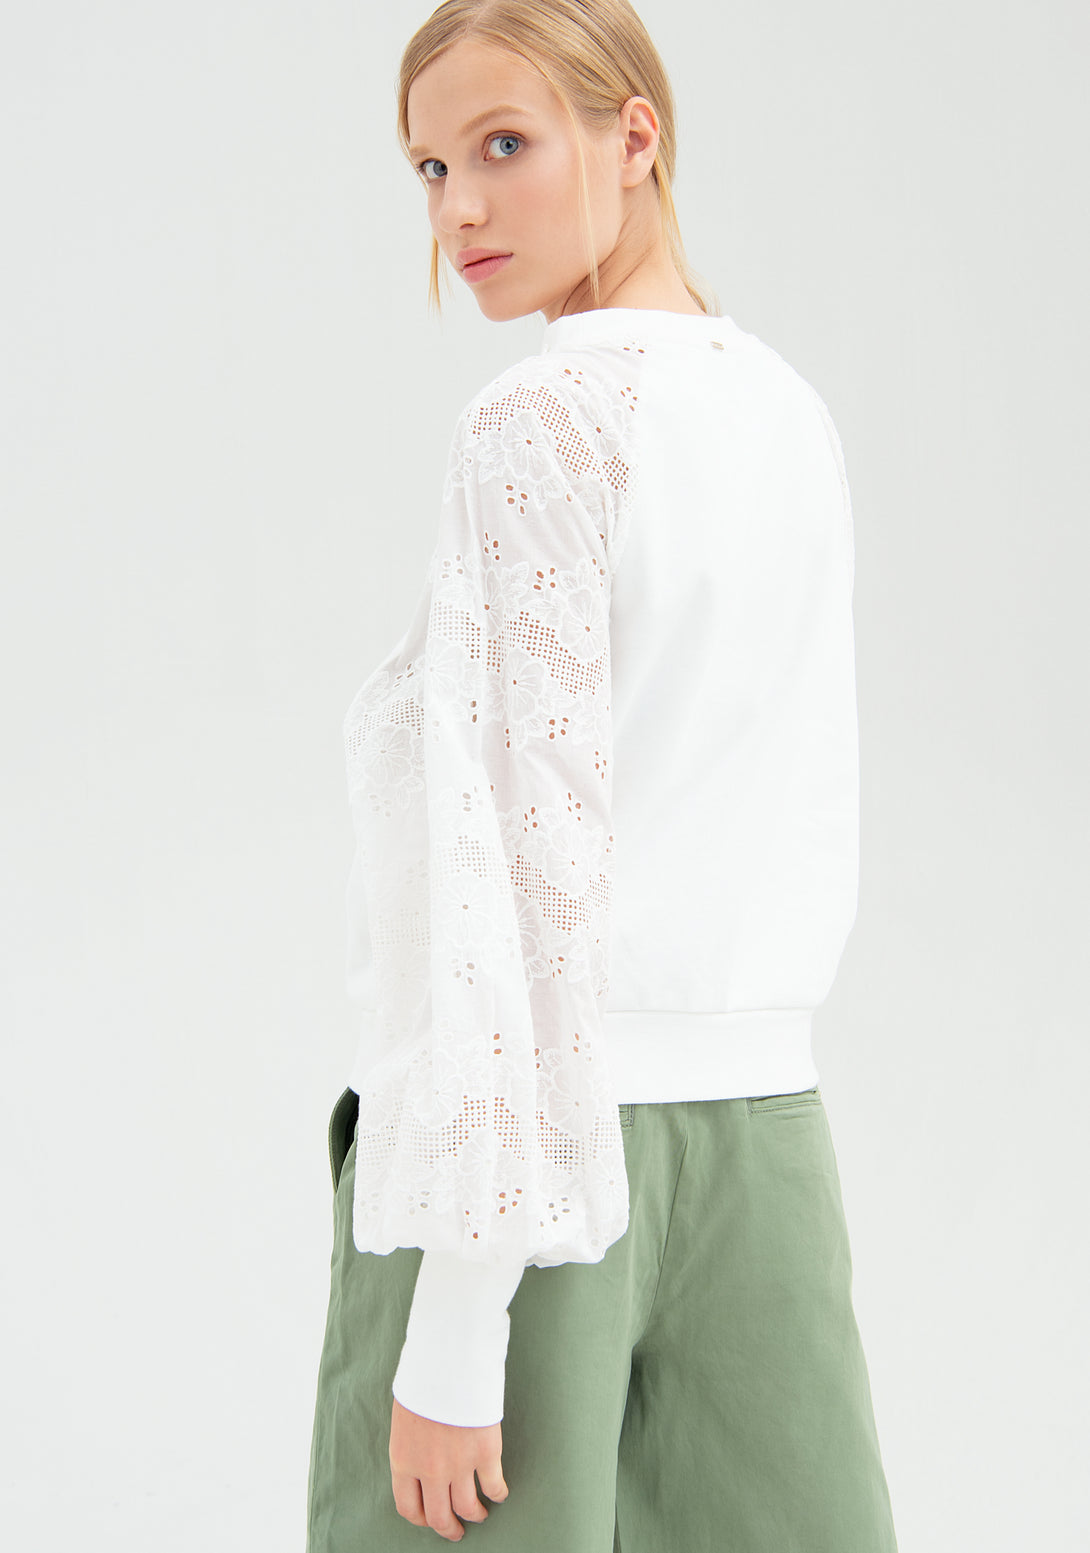 Sweater regular fit with long sleeves made in lace